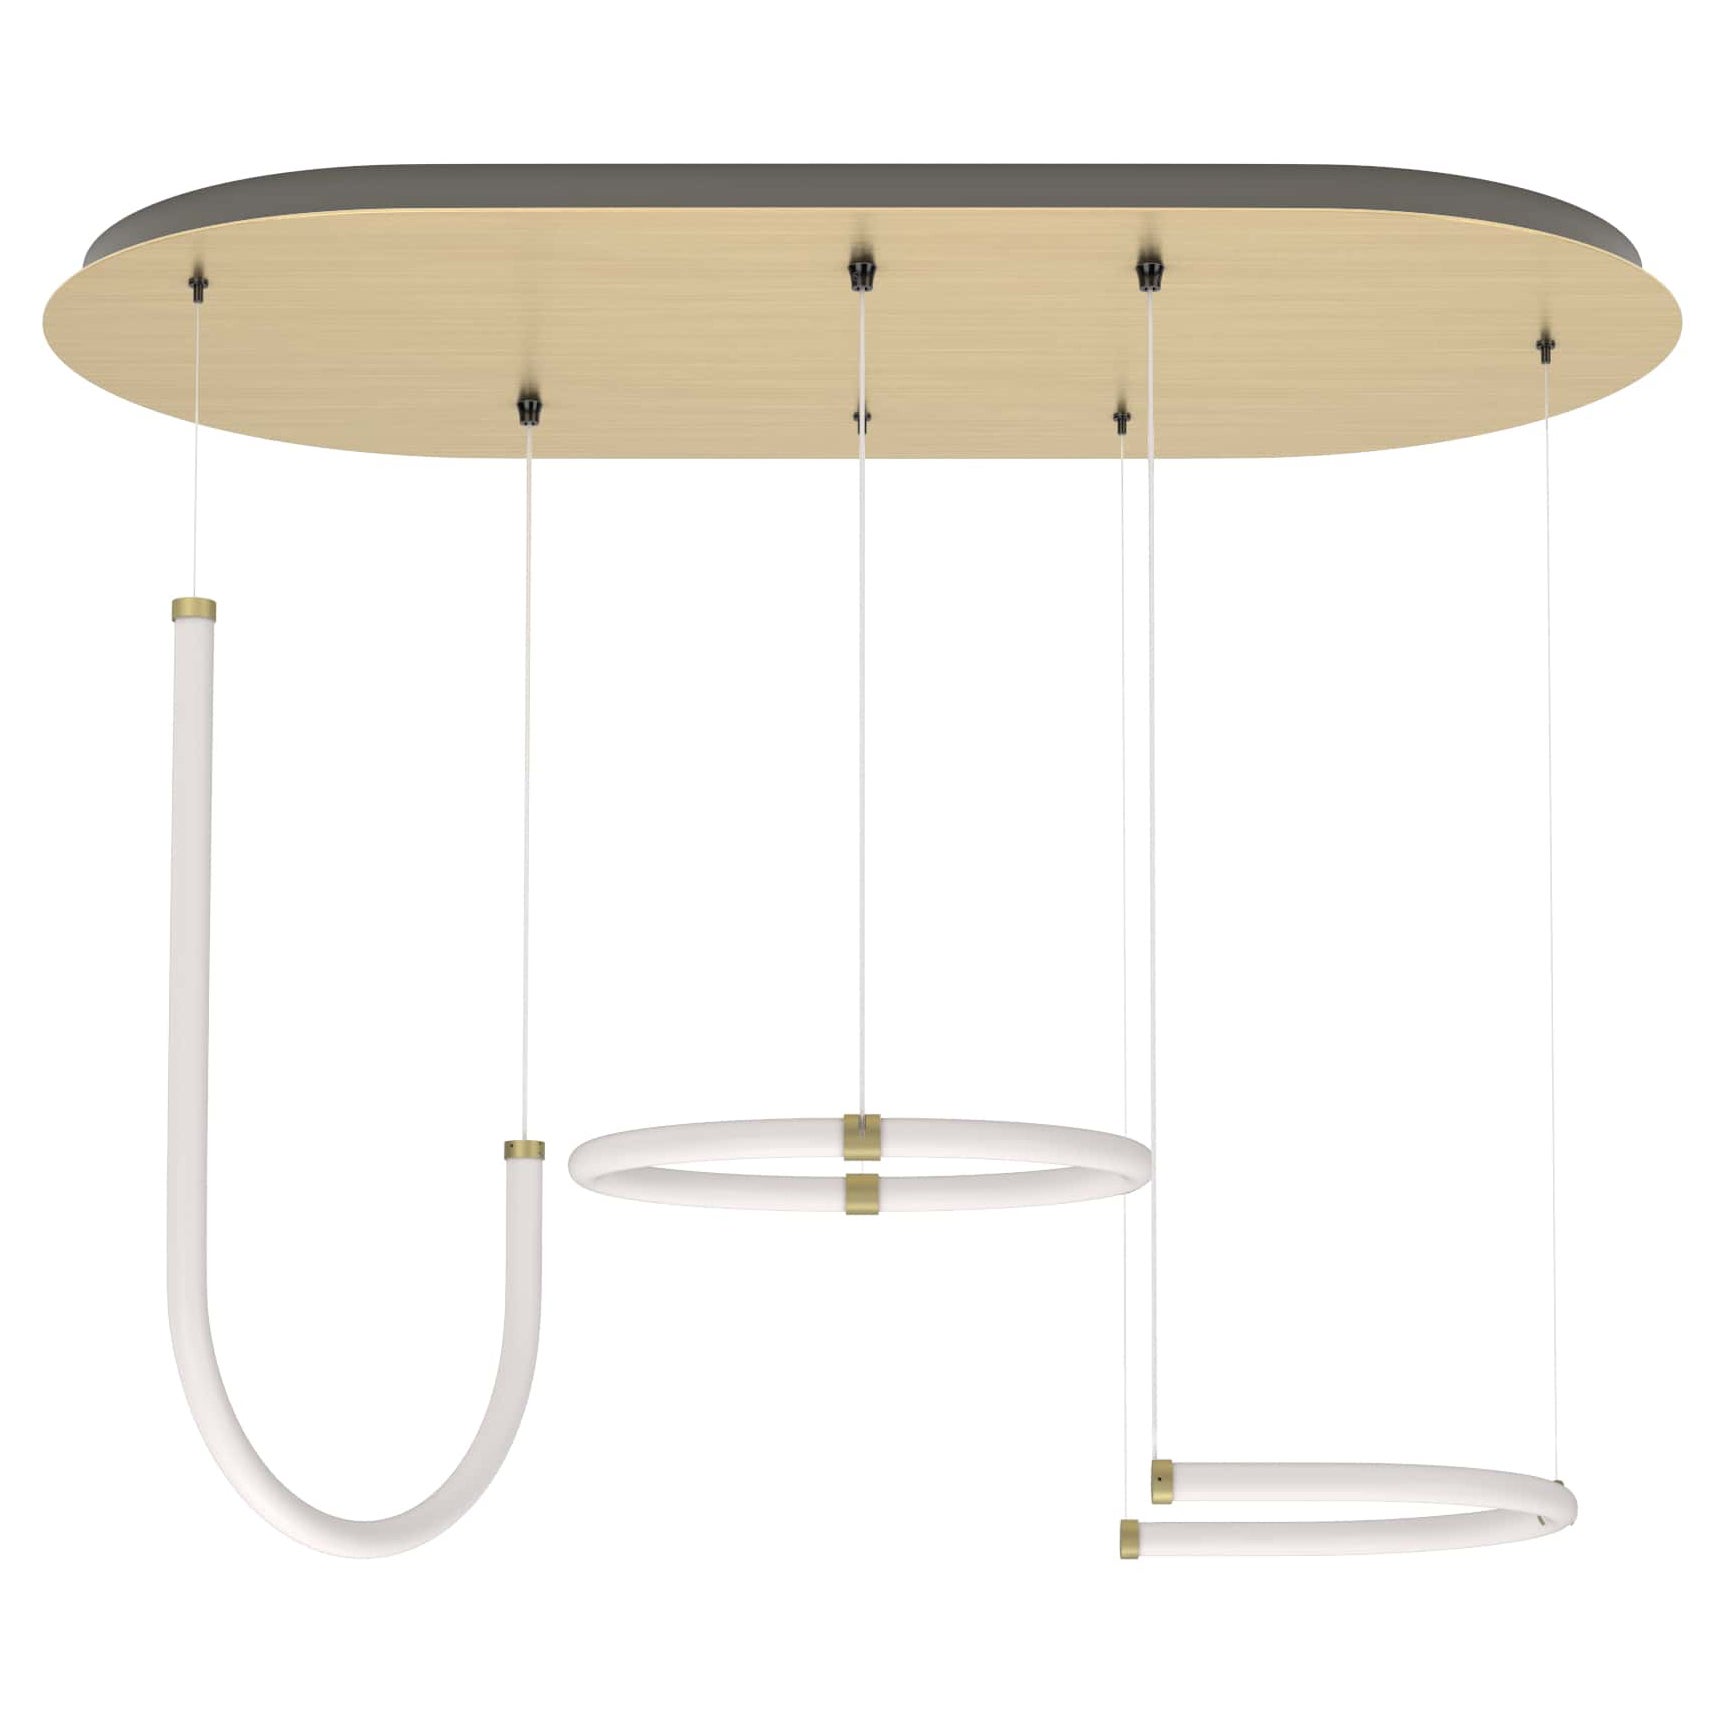 Petite Friture Unseen Triple Pendant Light System in Brass Transluscent For Sale